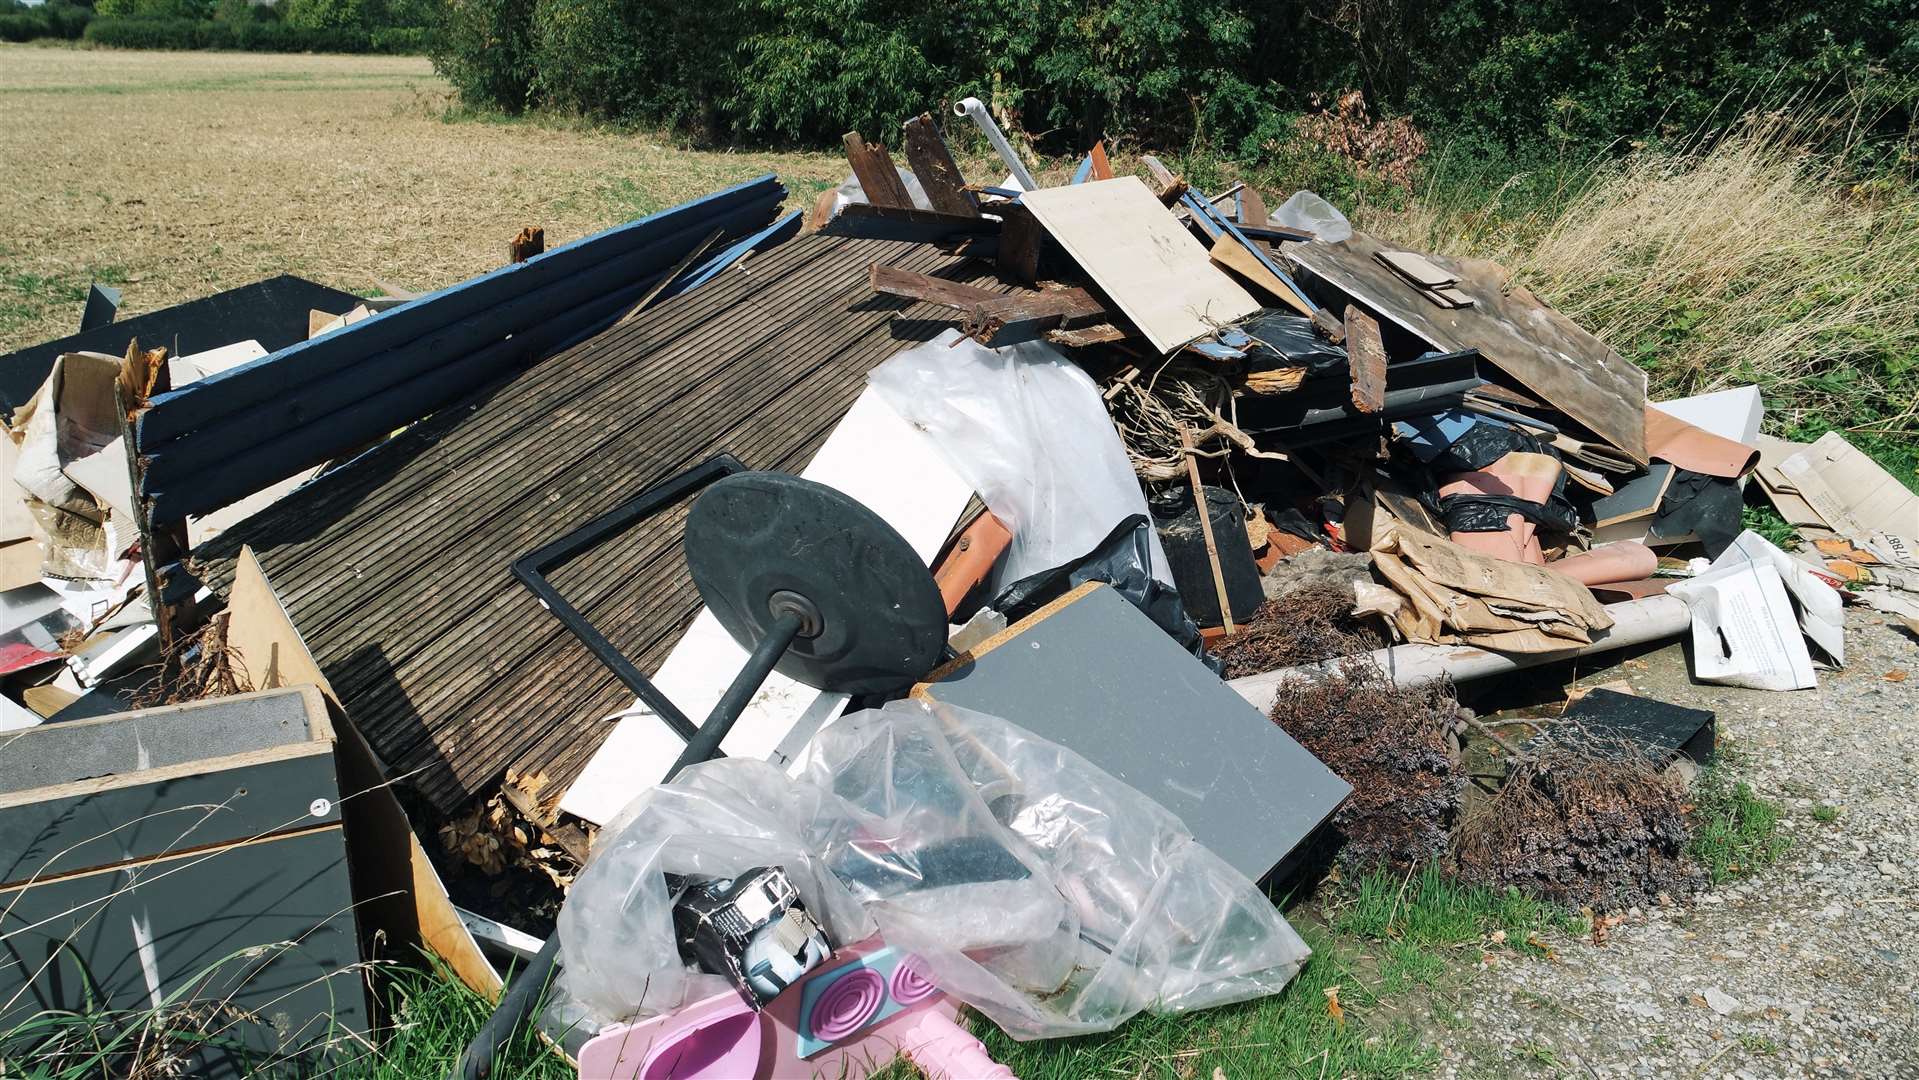 There are fears the closures could lead to a surge in fly-tipping